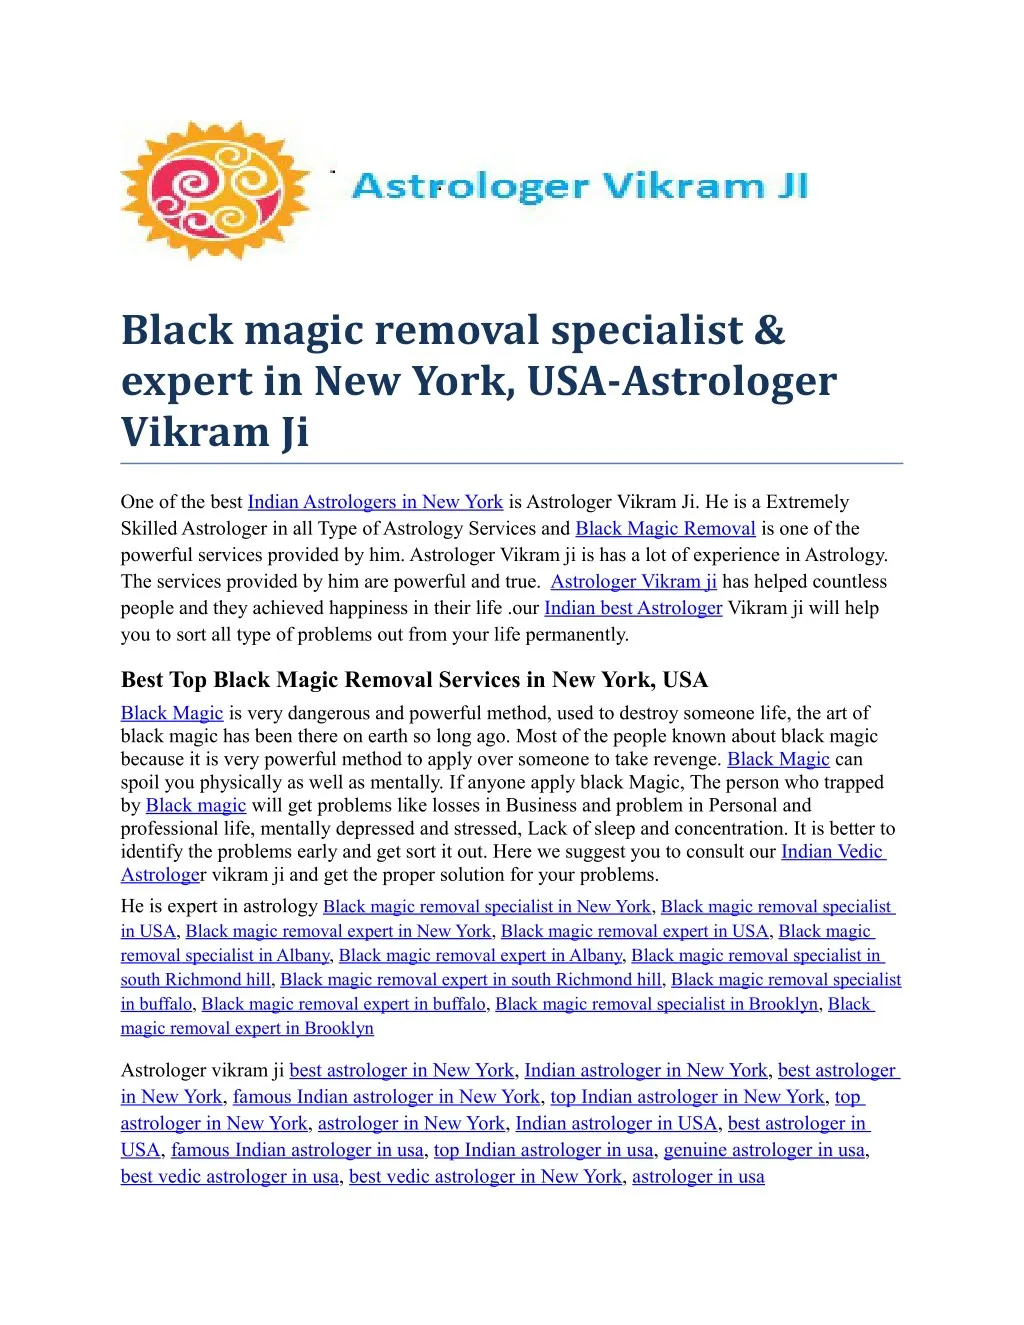 black magic removal specialist expert in new york